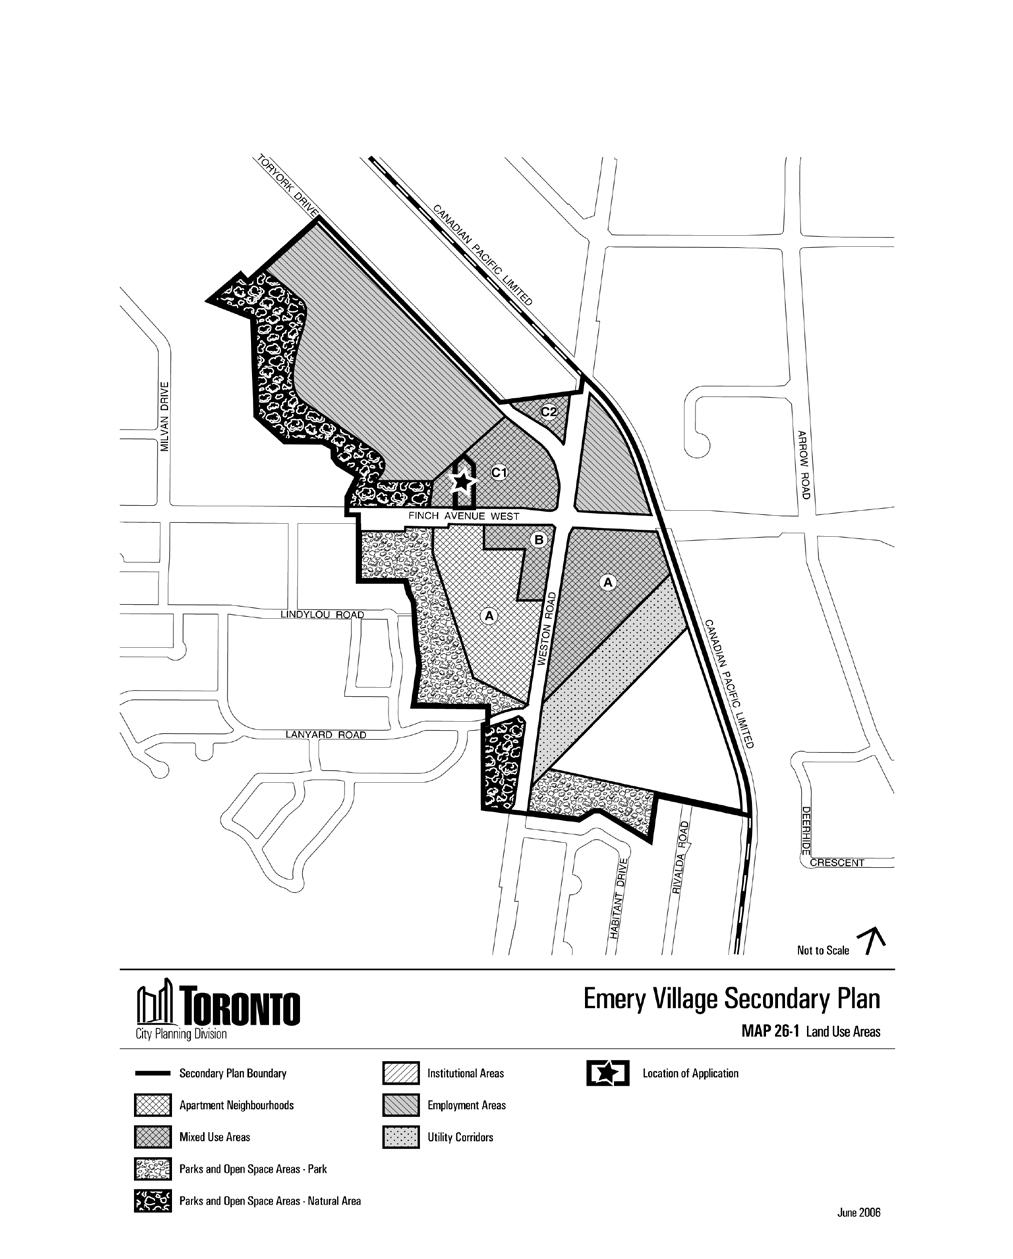 Attachment 4: Emery Village Secondary Plan - Land Use Areas 2370